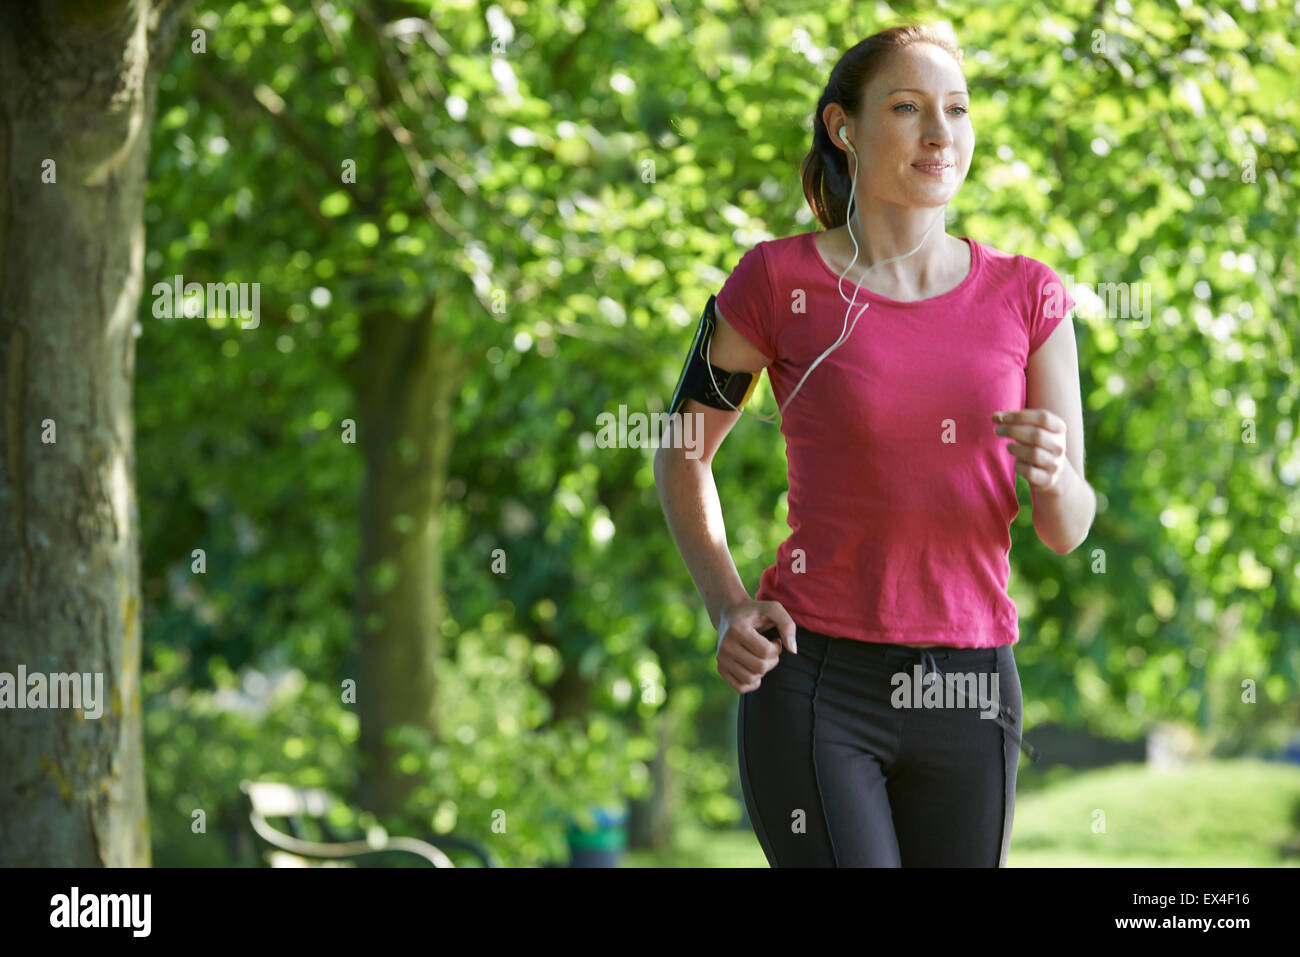 Female Runner In Park With Wearable Technology Stock Photo